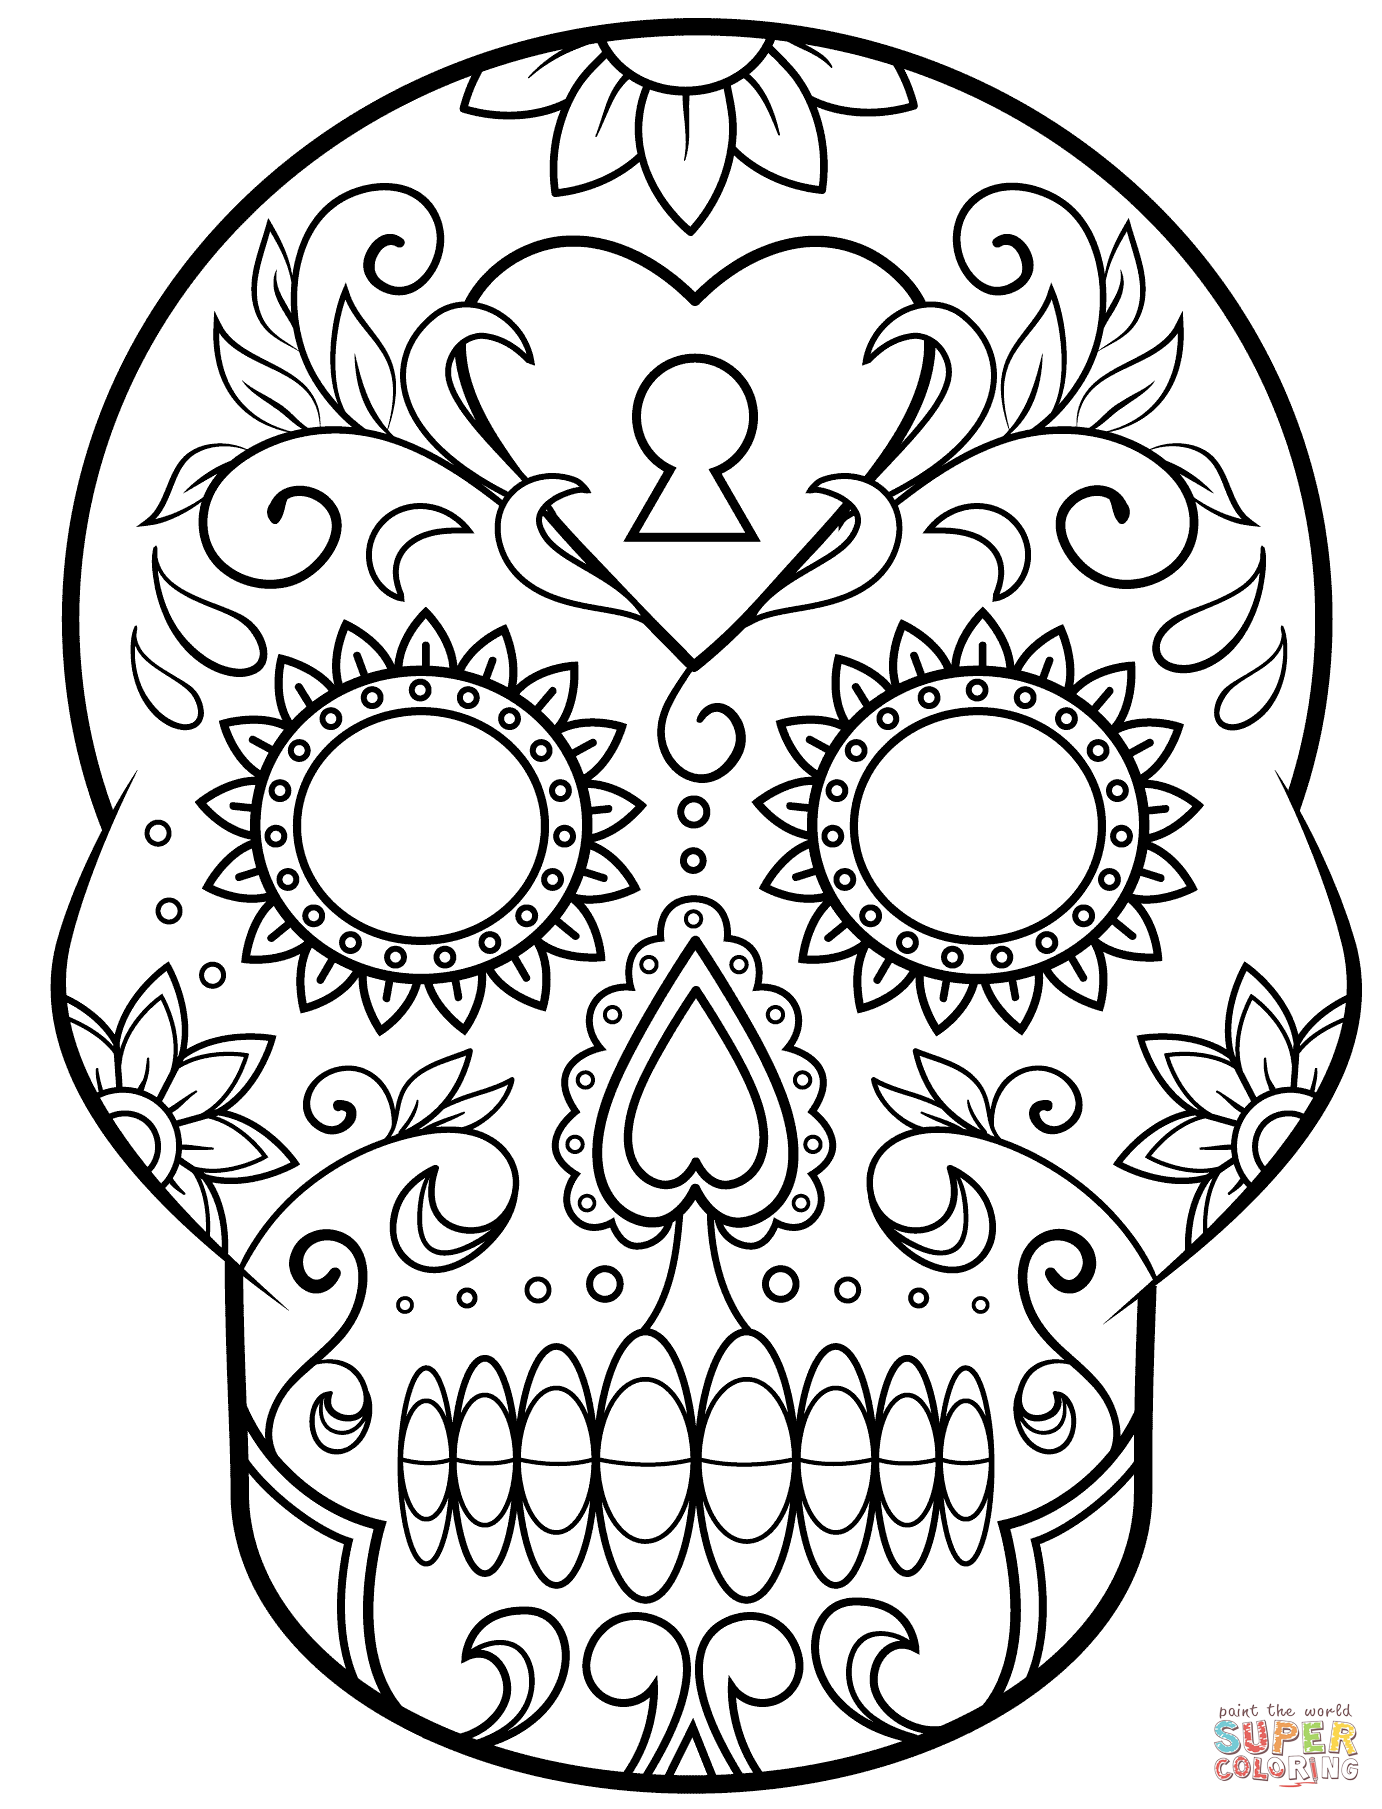 day-of-the-dead-coloring-page-beeloo-printable-crafts-and-activities